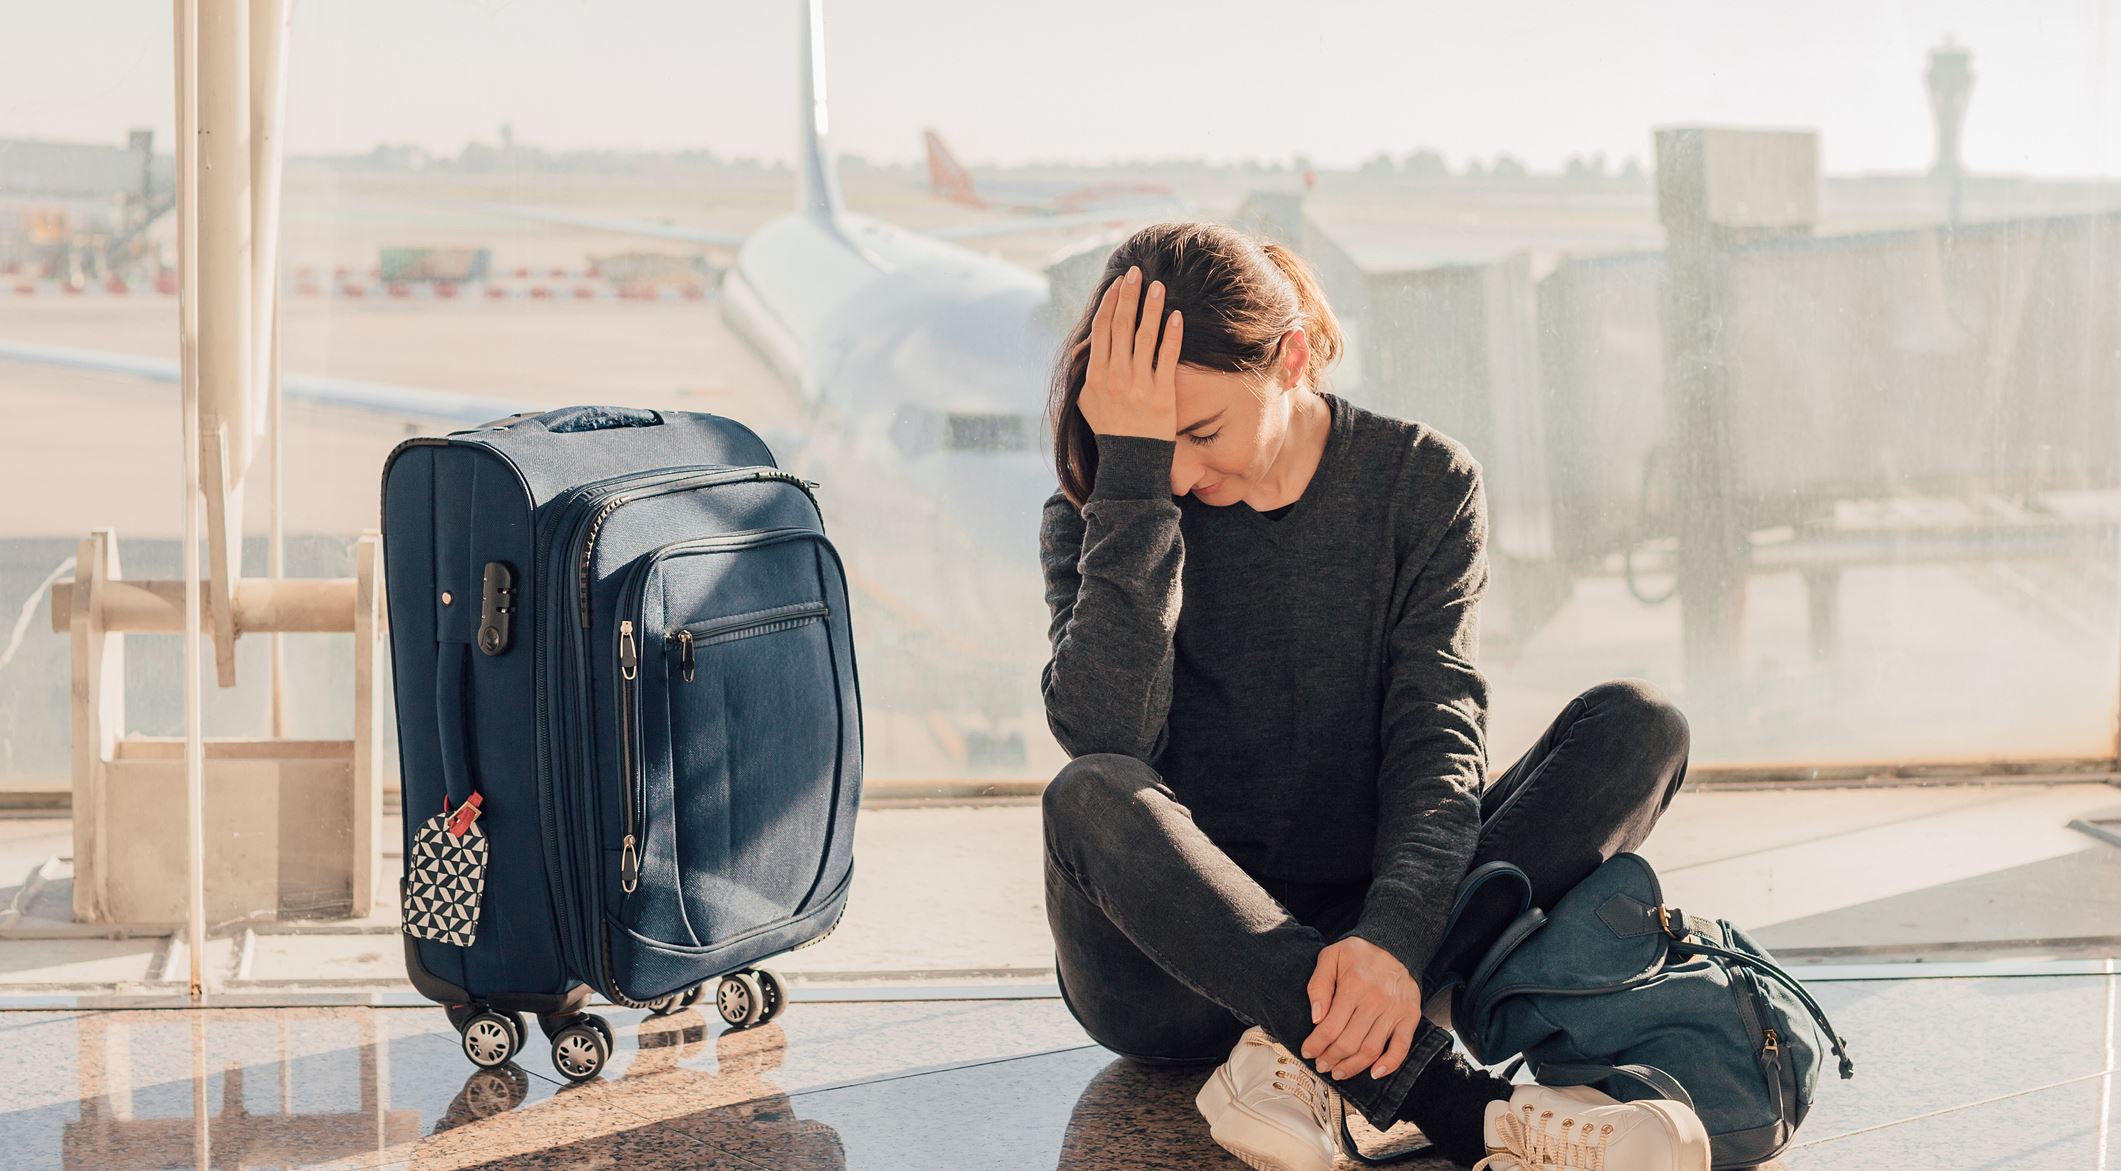 What is jet-lag?